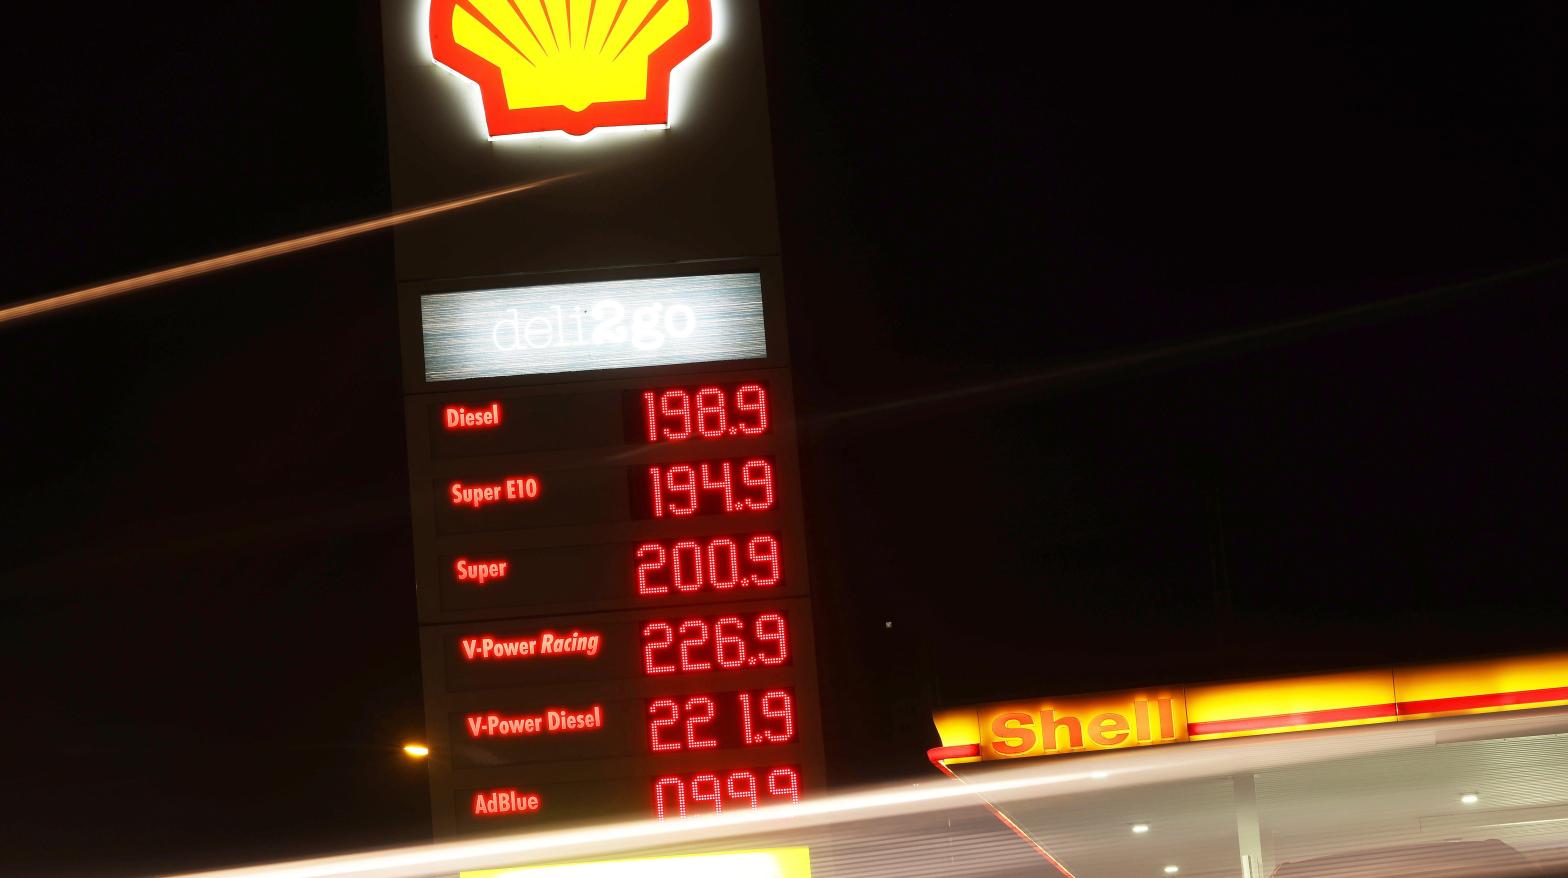 Prices for fuels at a gas station in North Rhine-Westphalia, Germany this week. (Photo: Oliver Berg/picture-alliance/dpa/AP Images, AP)